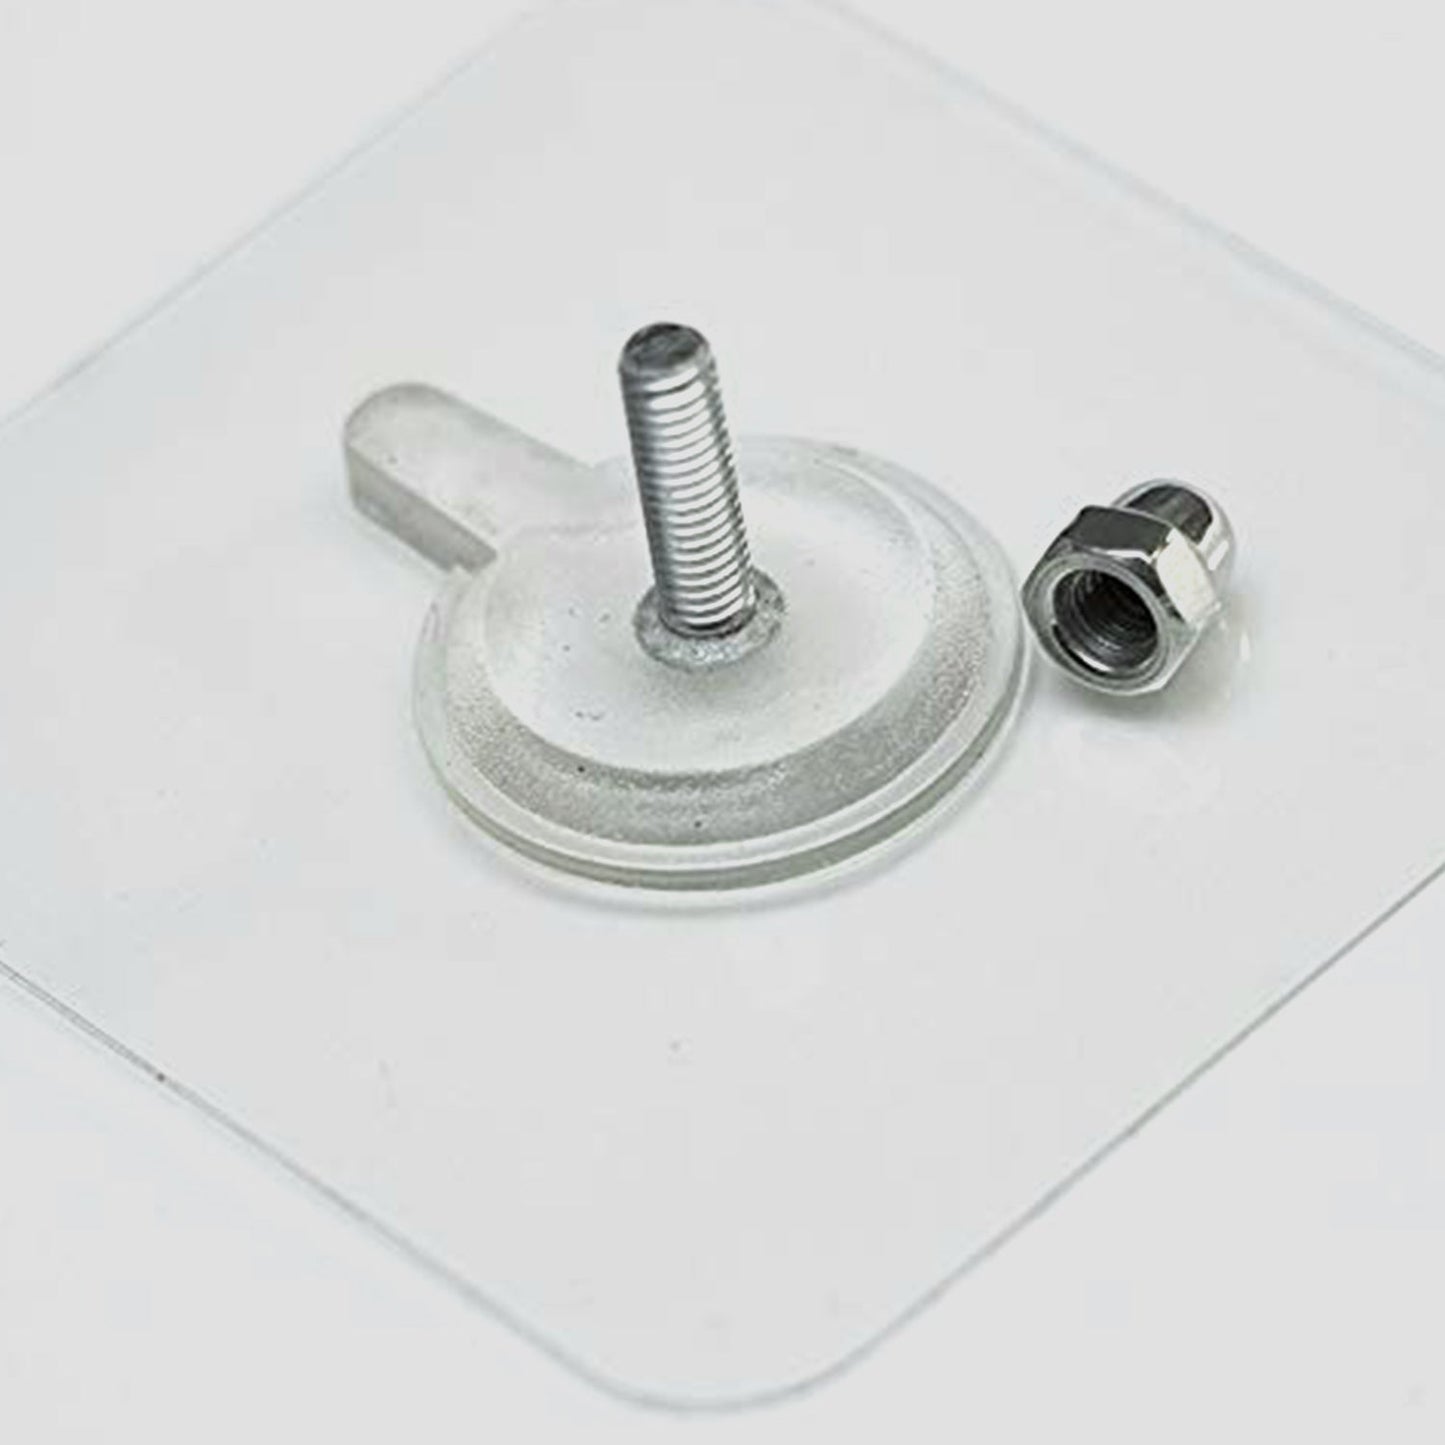 9017 Adhesive Screw Wall Hook used in all kinds of places including household and offices for hanging and holding stuffs etc. DeoDap